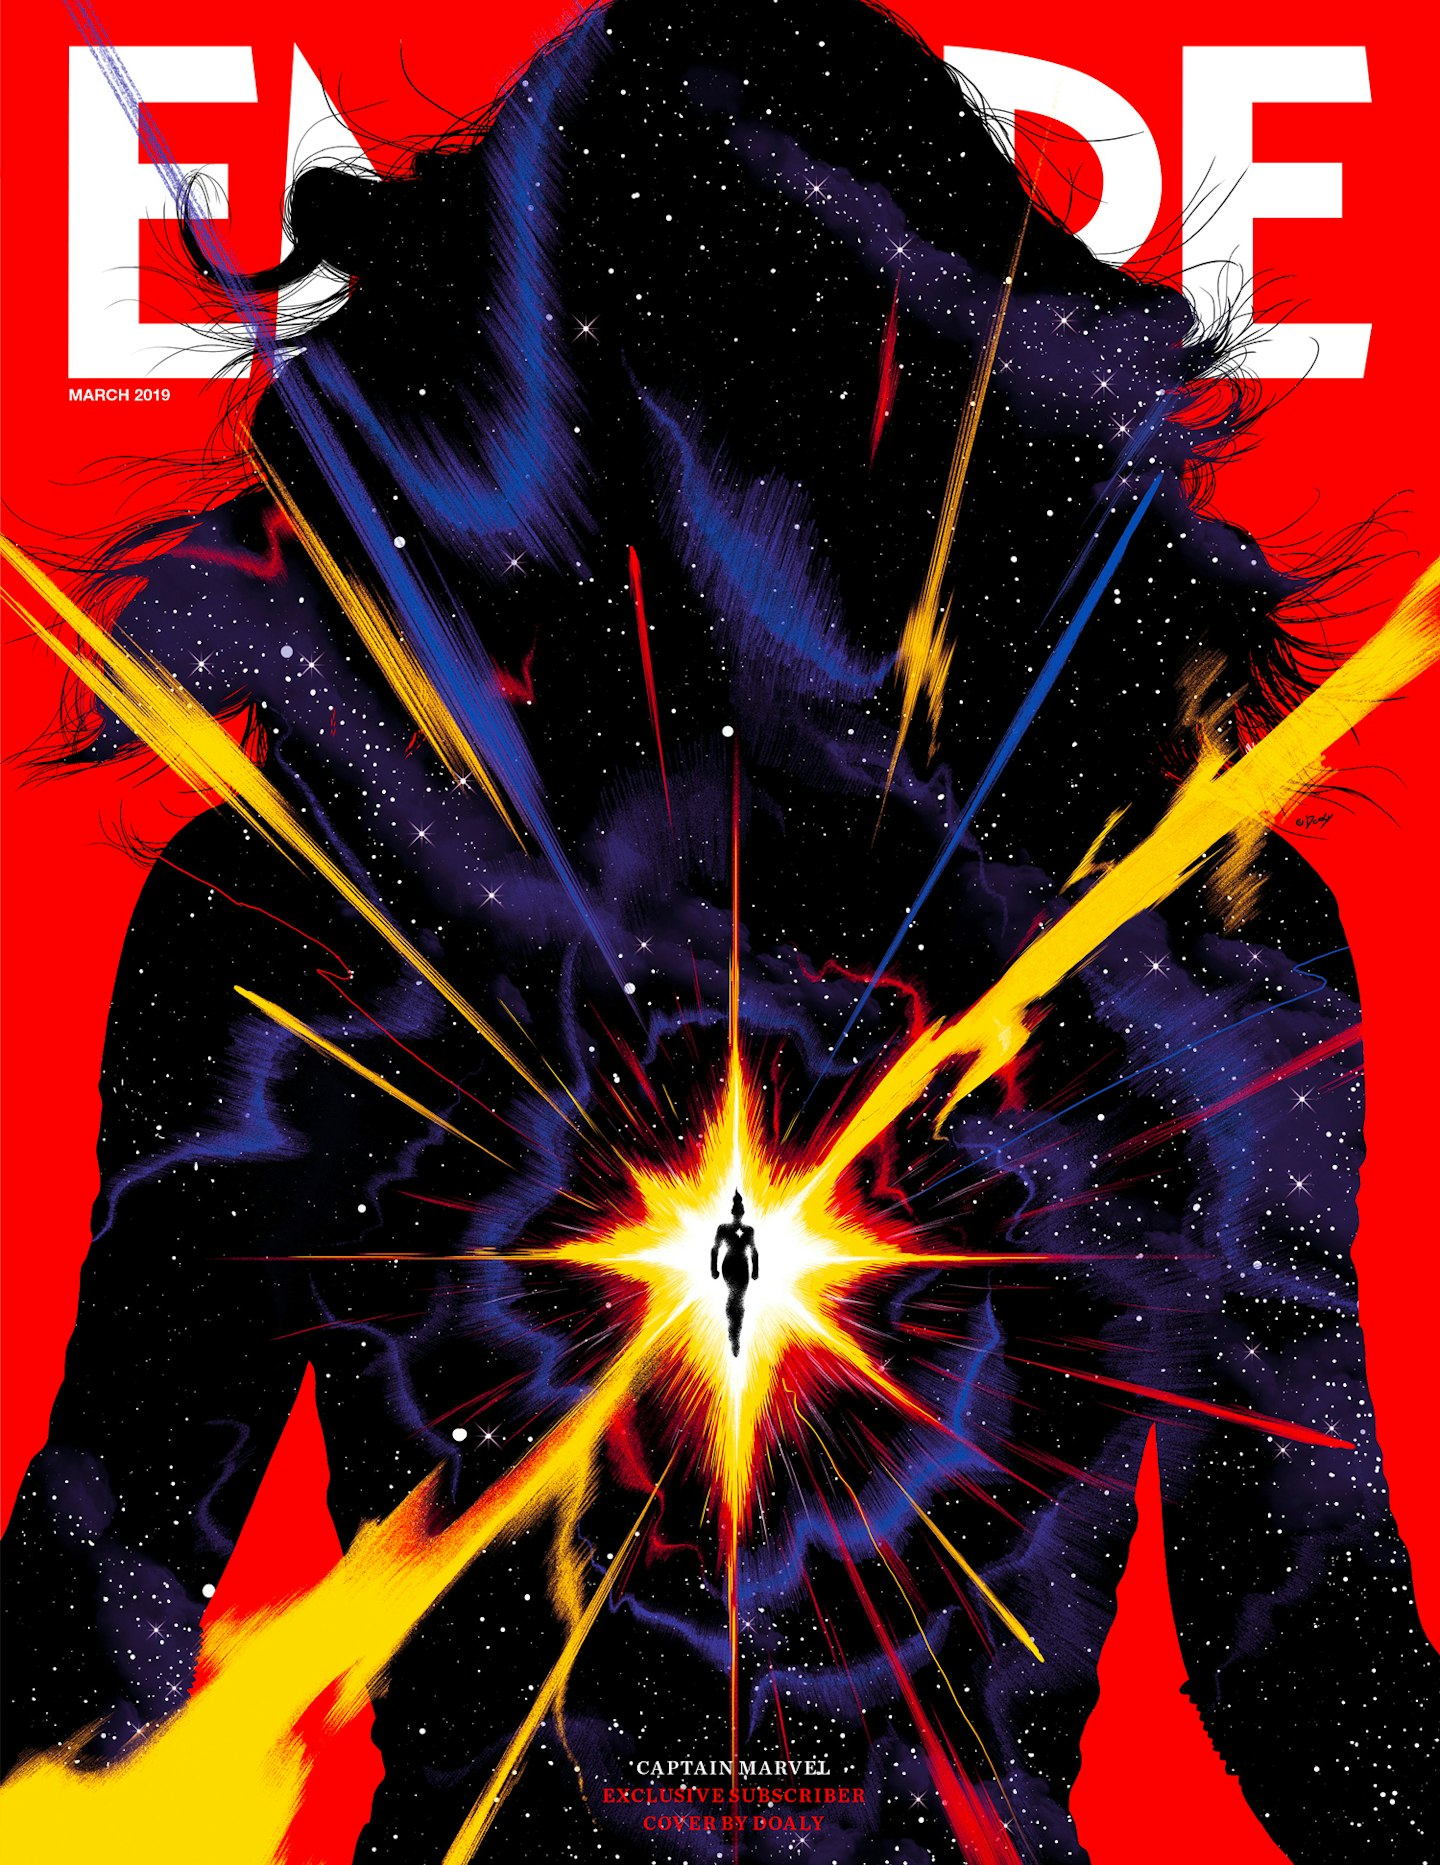 Empire – March 2019 – Captain Marvel Subscriber cover